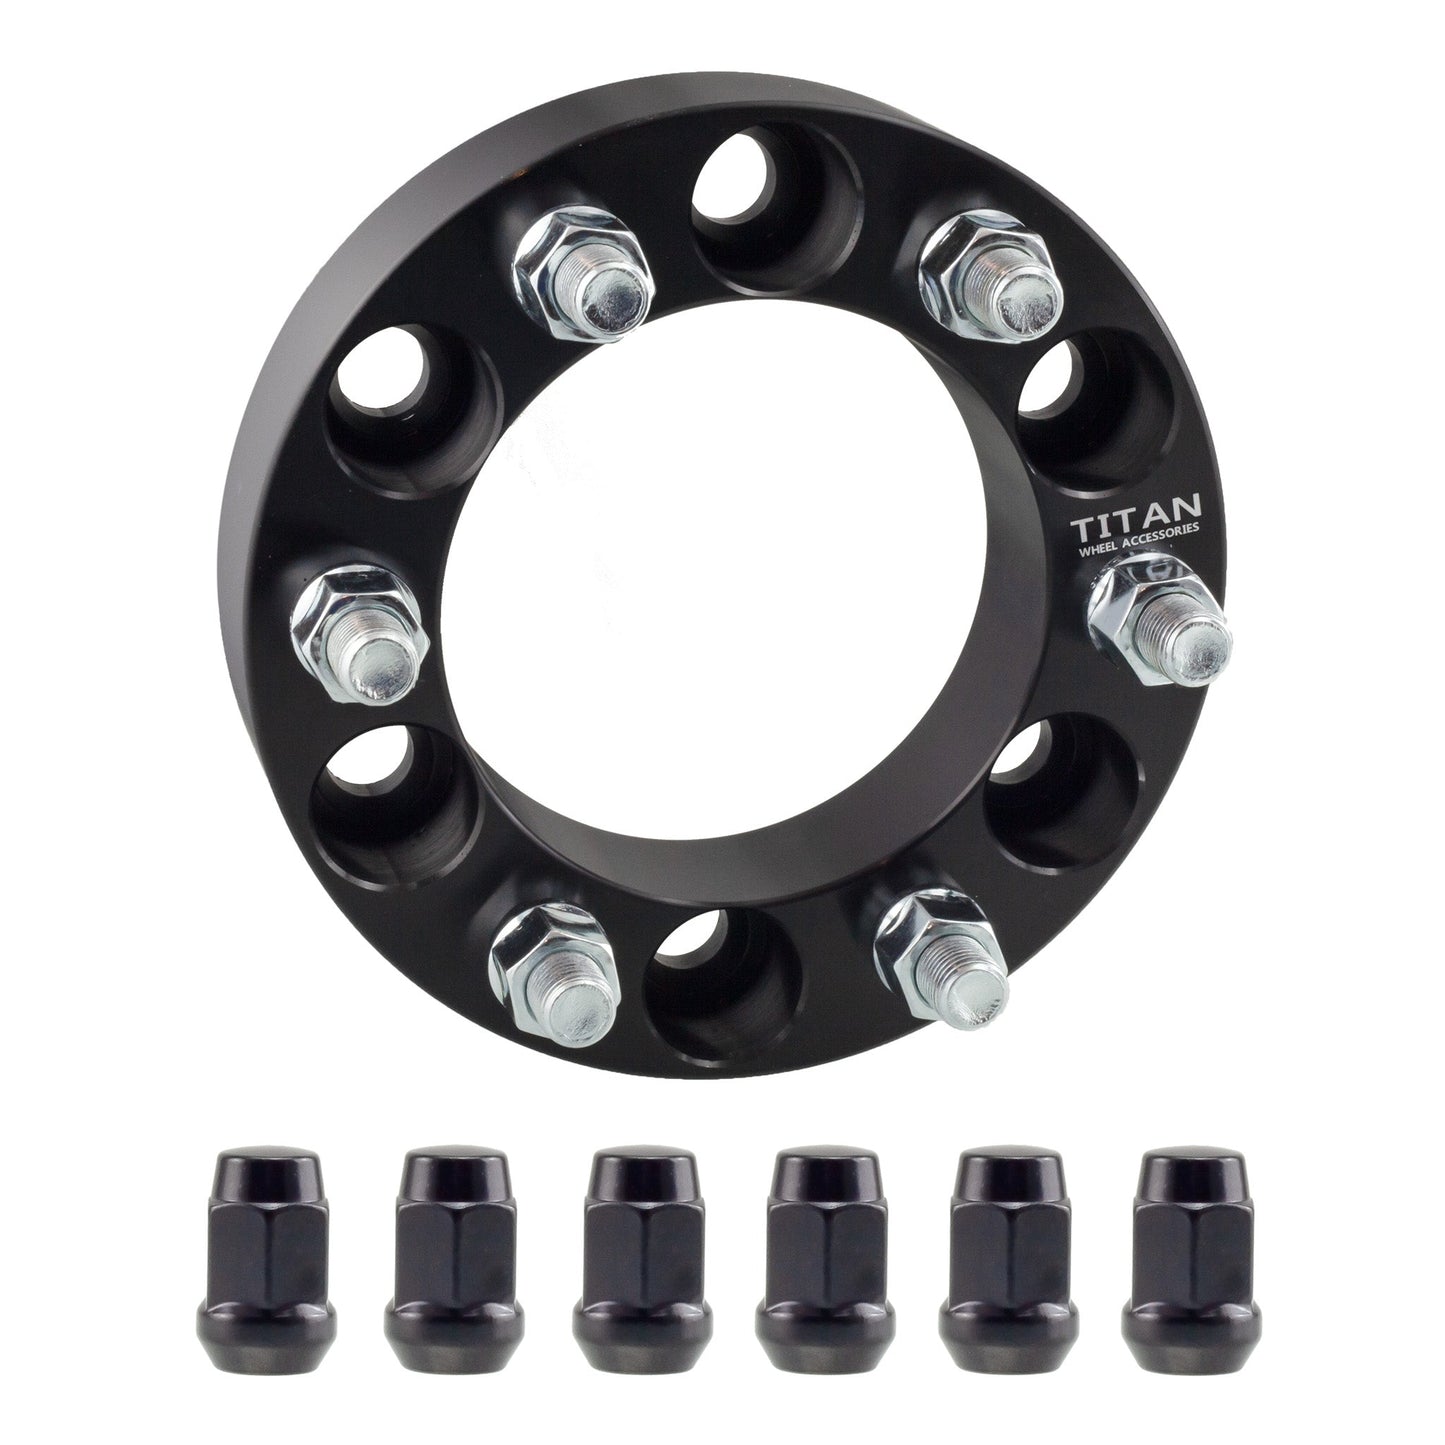 1.5" (38mm) Titan Wheel Spacers for Chevy Colorado GMC Canyon | 6x120 | 66.9 Hubcentric |14x1.5 Studs | Titan Wheel Accessories